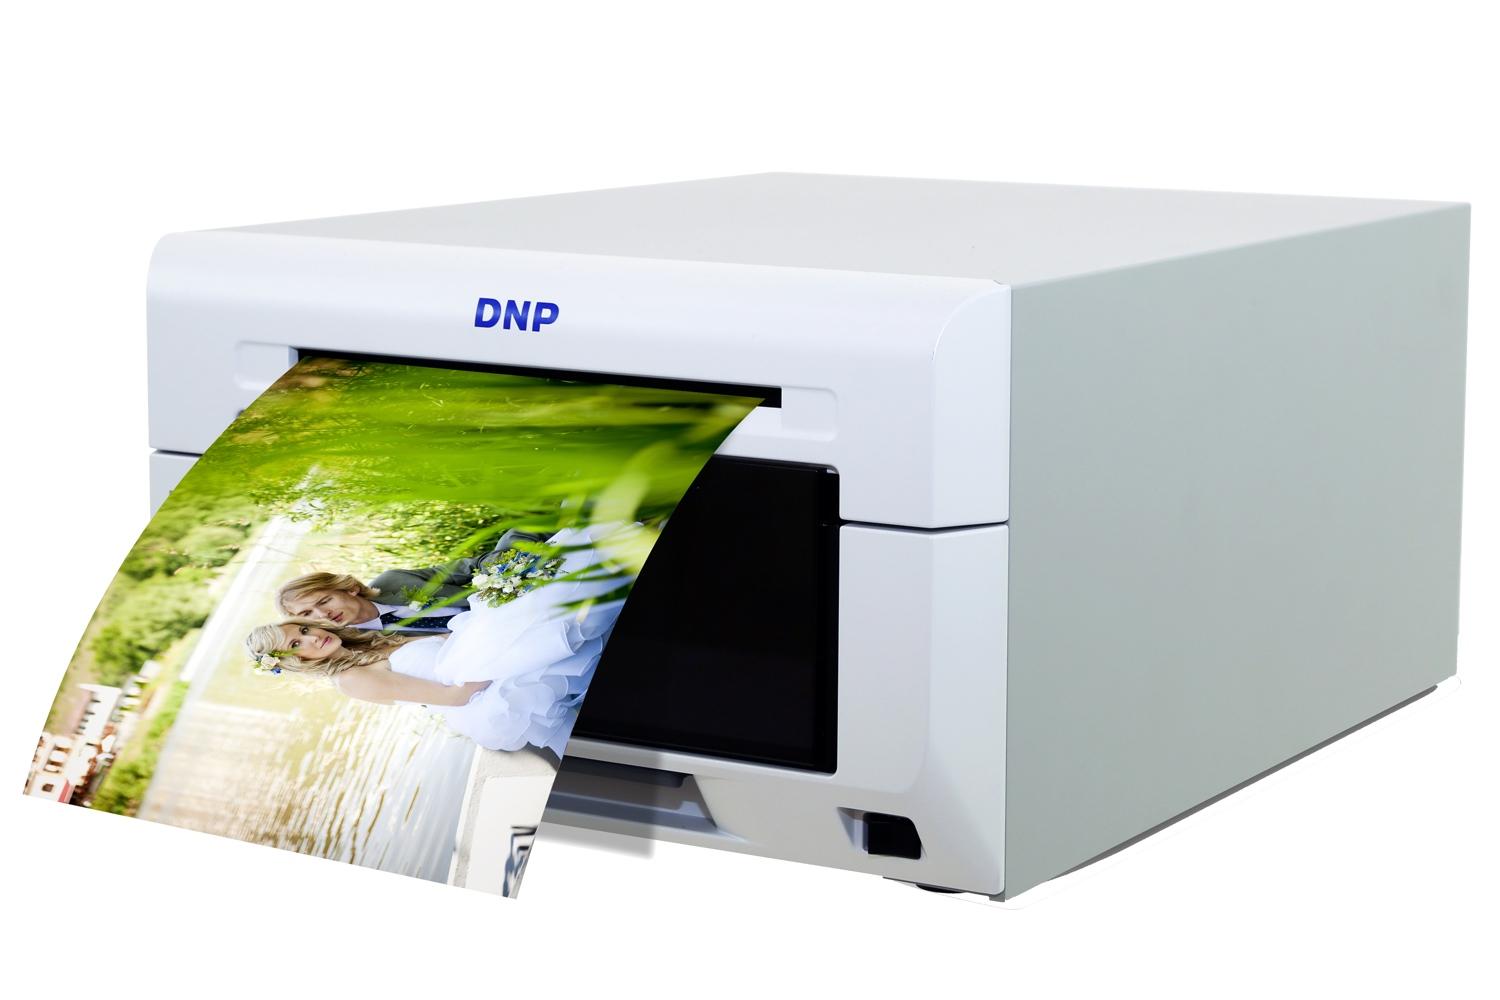 dnp ds620a photo printer is overkill for consumers but could be lucrative pros right